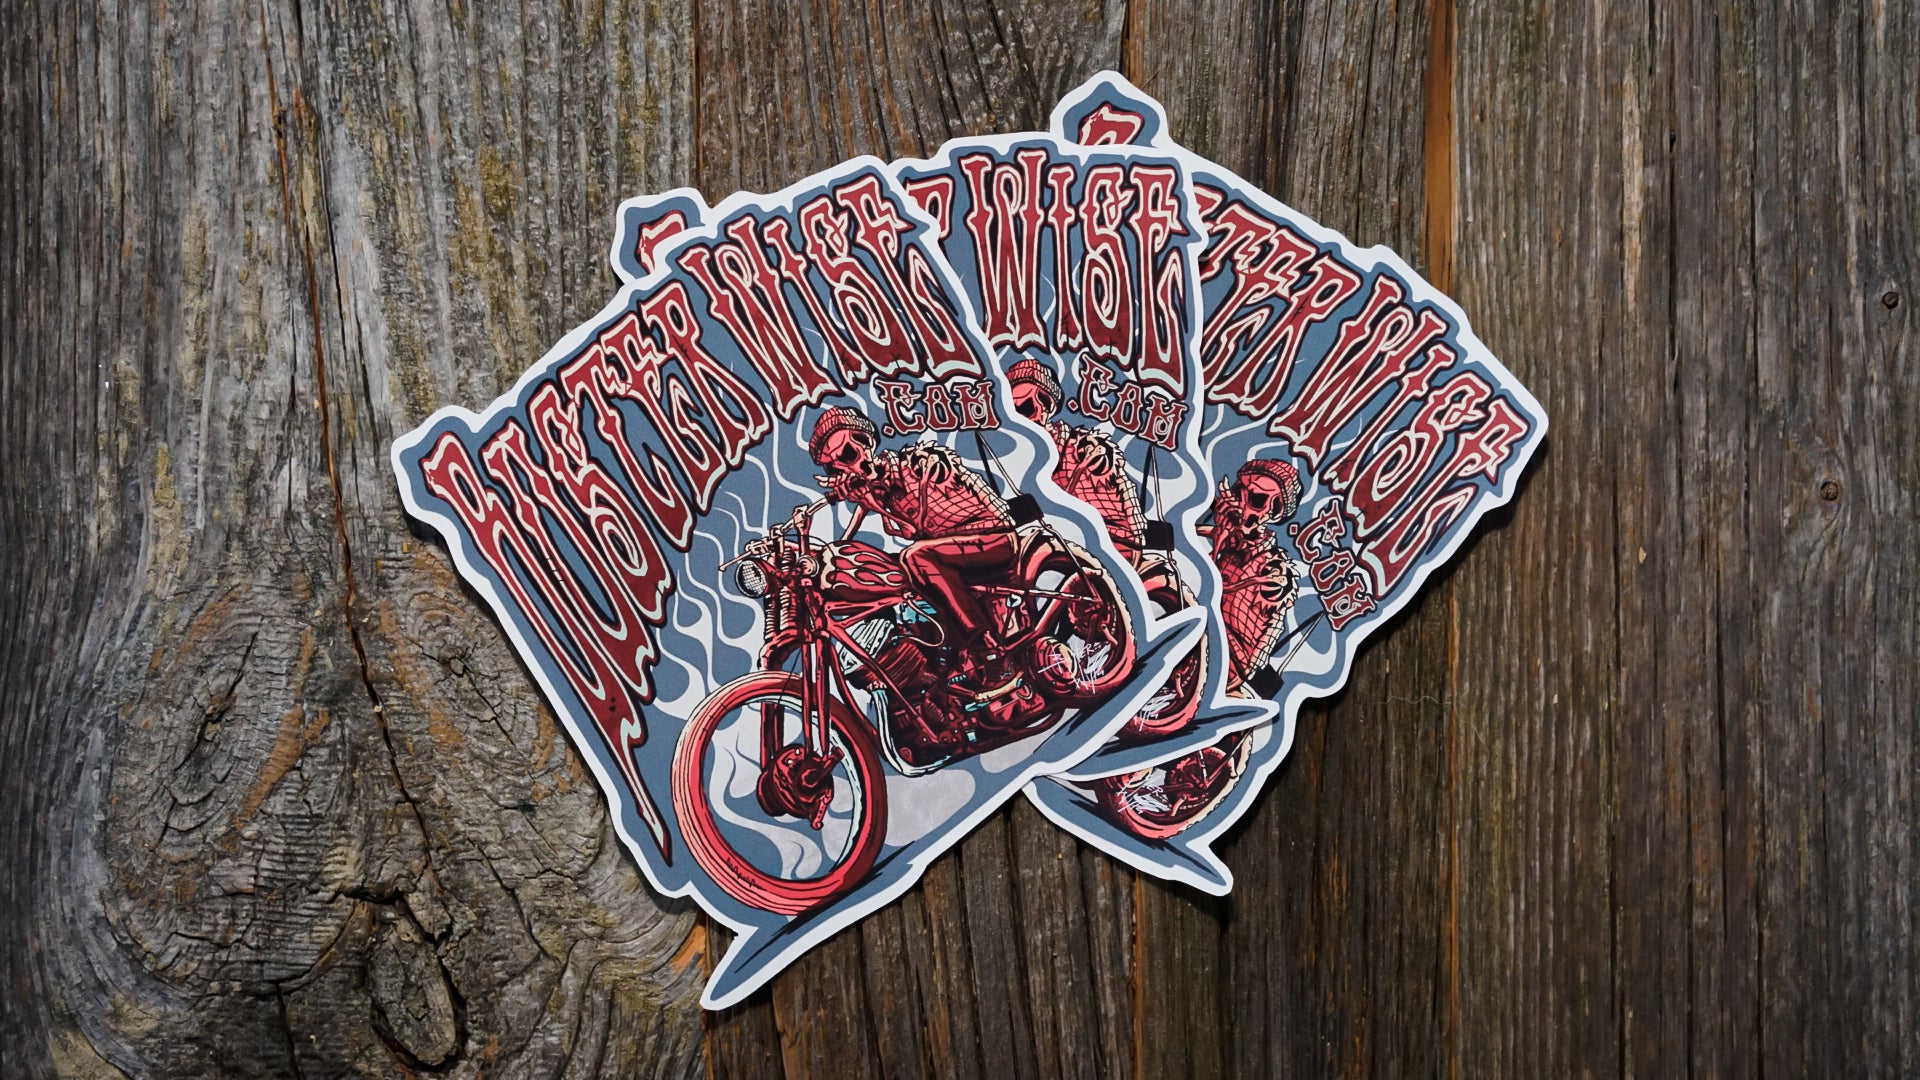 Buster Wise Sticker